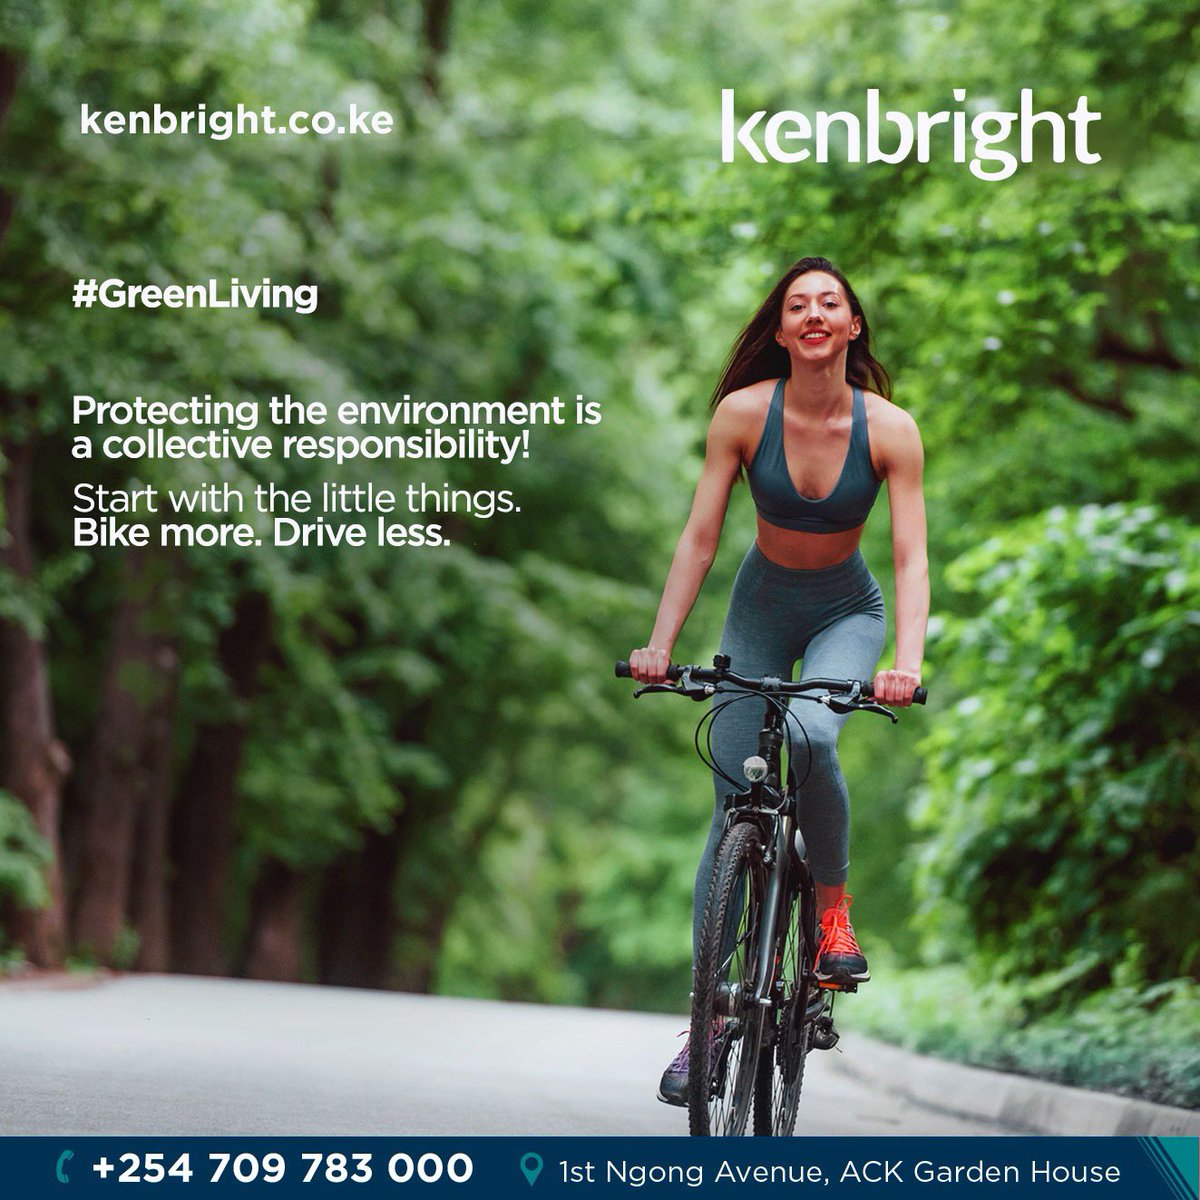 #GreenLiving
 Now more than ever, we must all take action to protect our environment.

Drive less, bike your way to your destination & more.

#Kenbright #Protecttheearth #protecttheenvironment #FridayFeeling